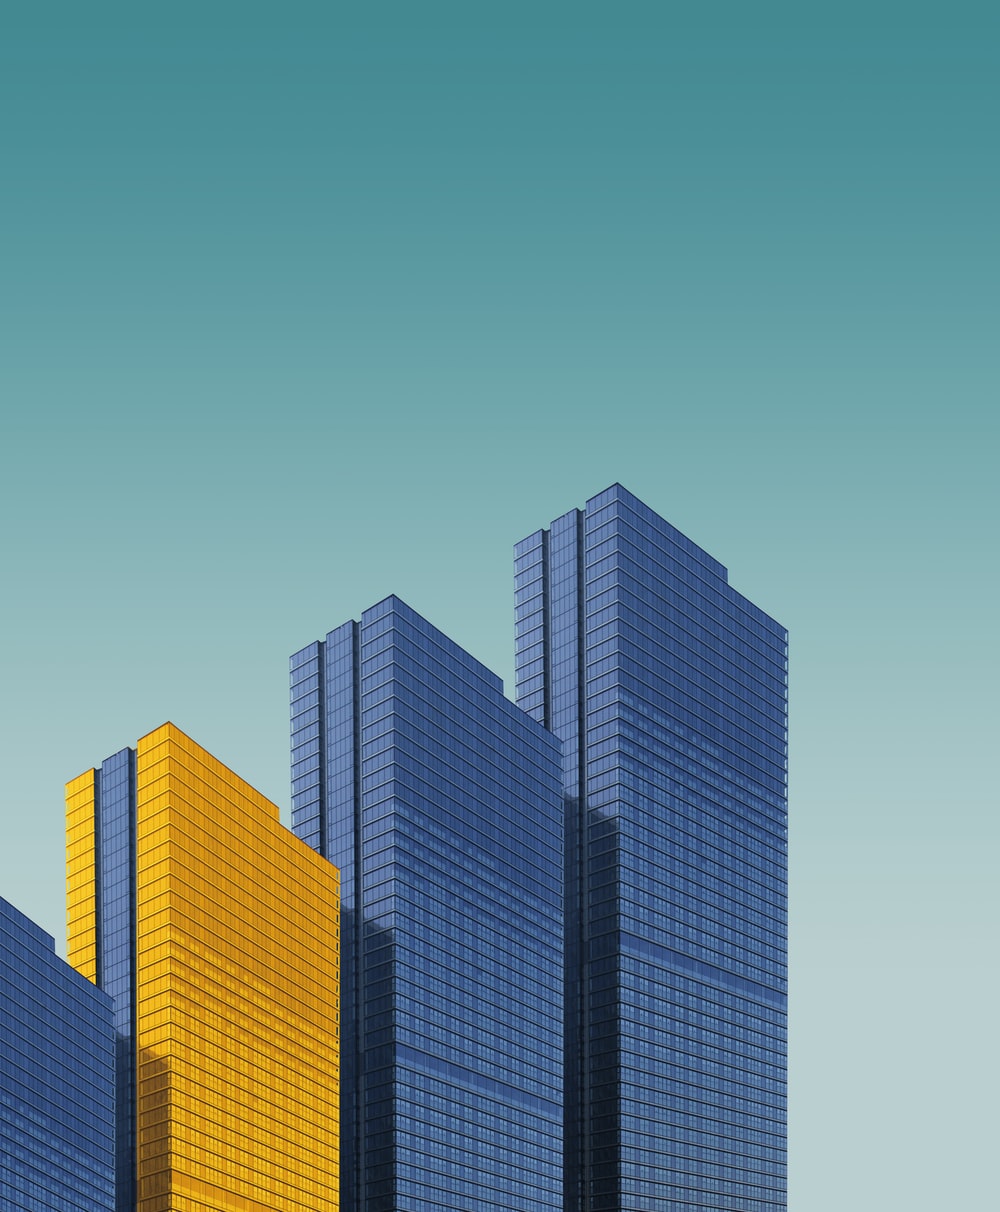 Minimal City Picture. Download Free Image